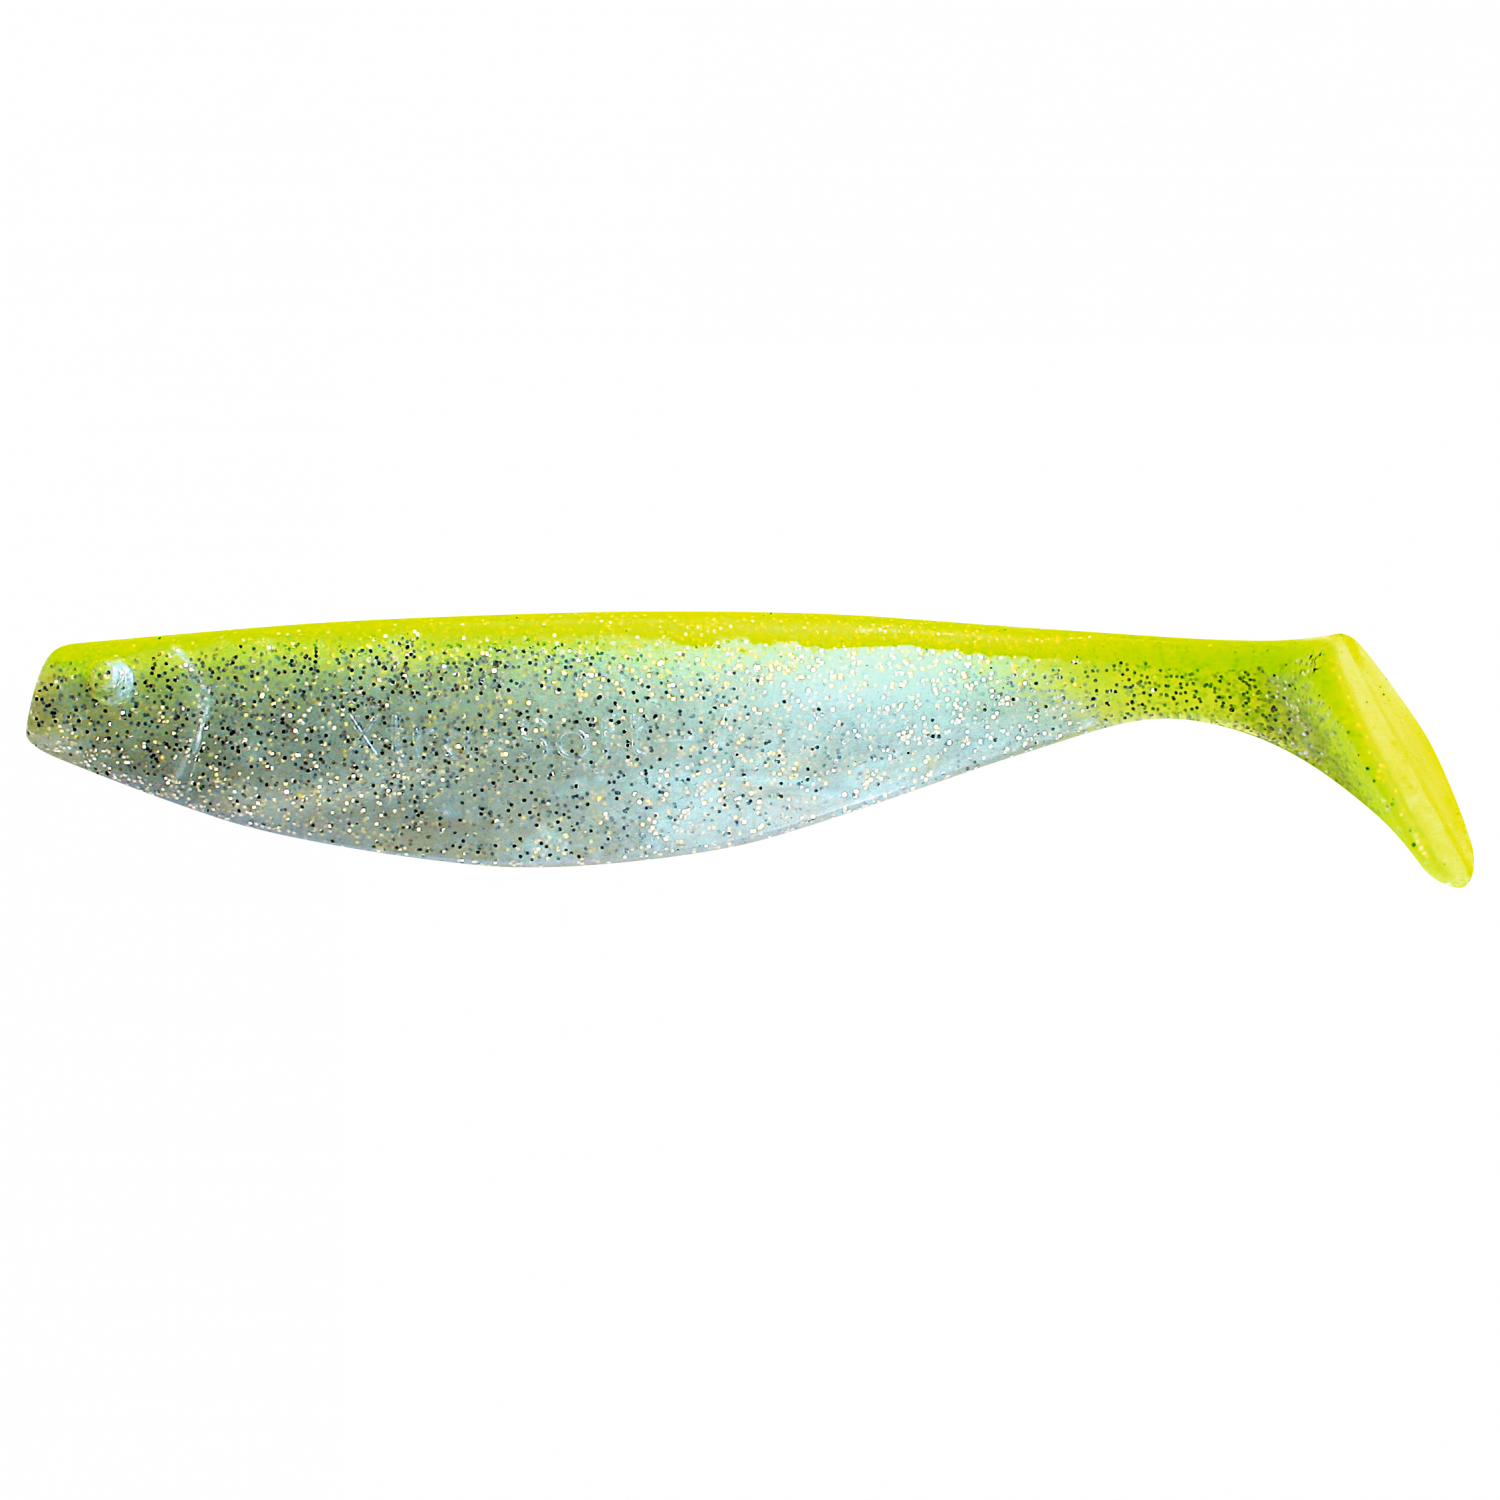 ShadXperts Xtra-Soft 6" Shad (blue/Pearl/glitter/fluo Yellow) 